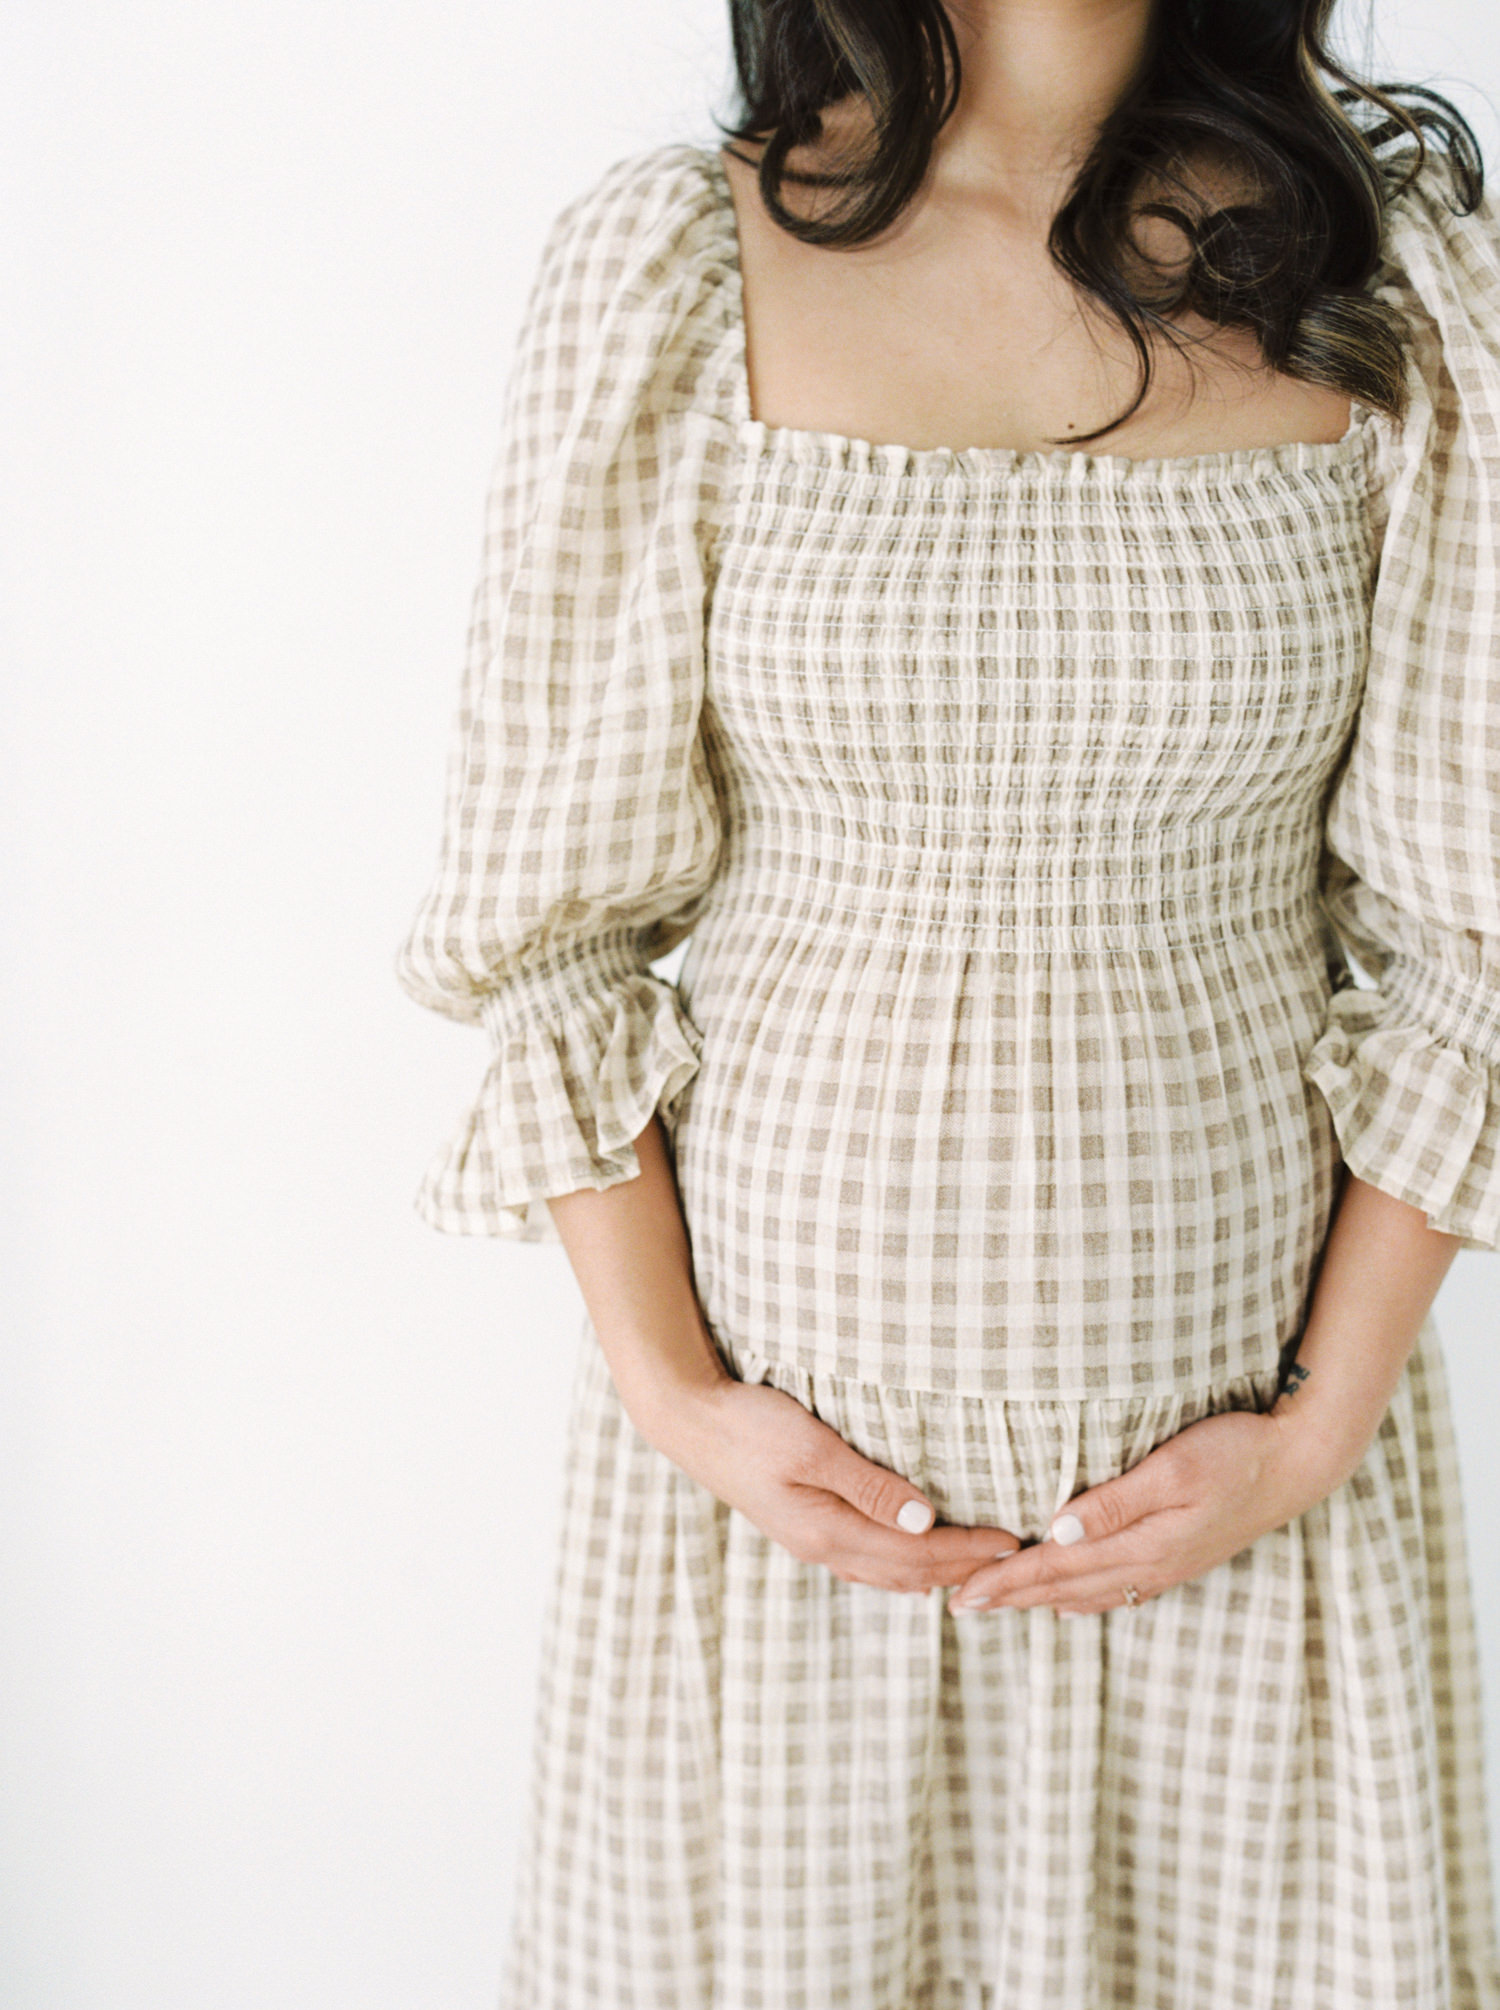 Expecting mother shown from the shoulders down in a smocked brown and white maternity dress in a markham photo studio